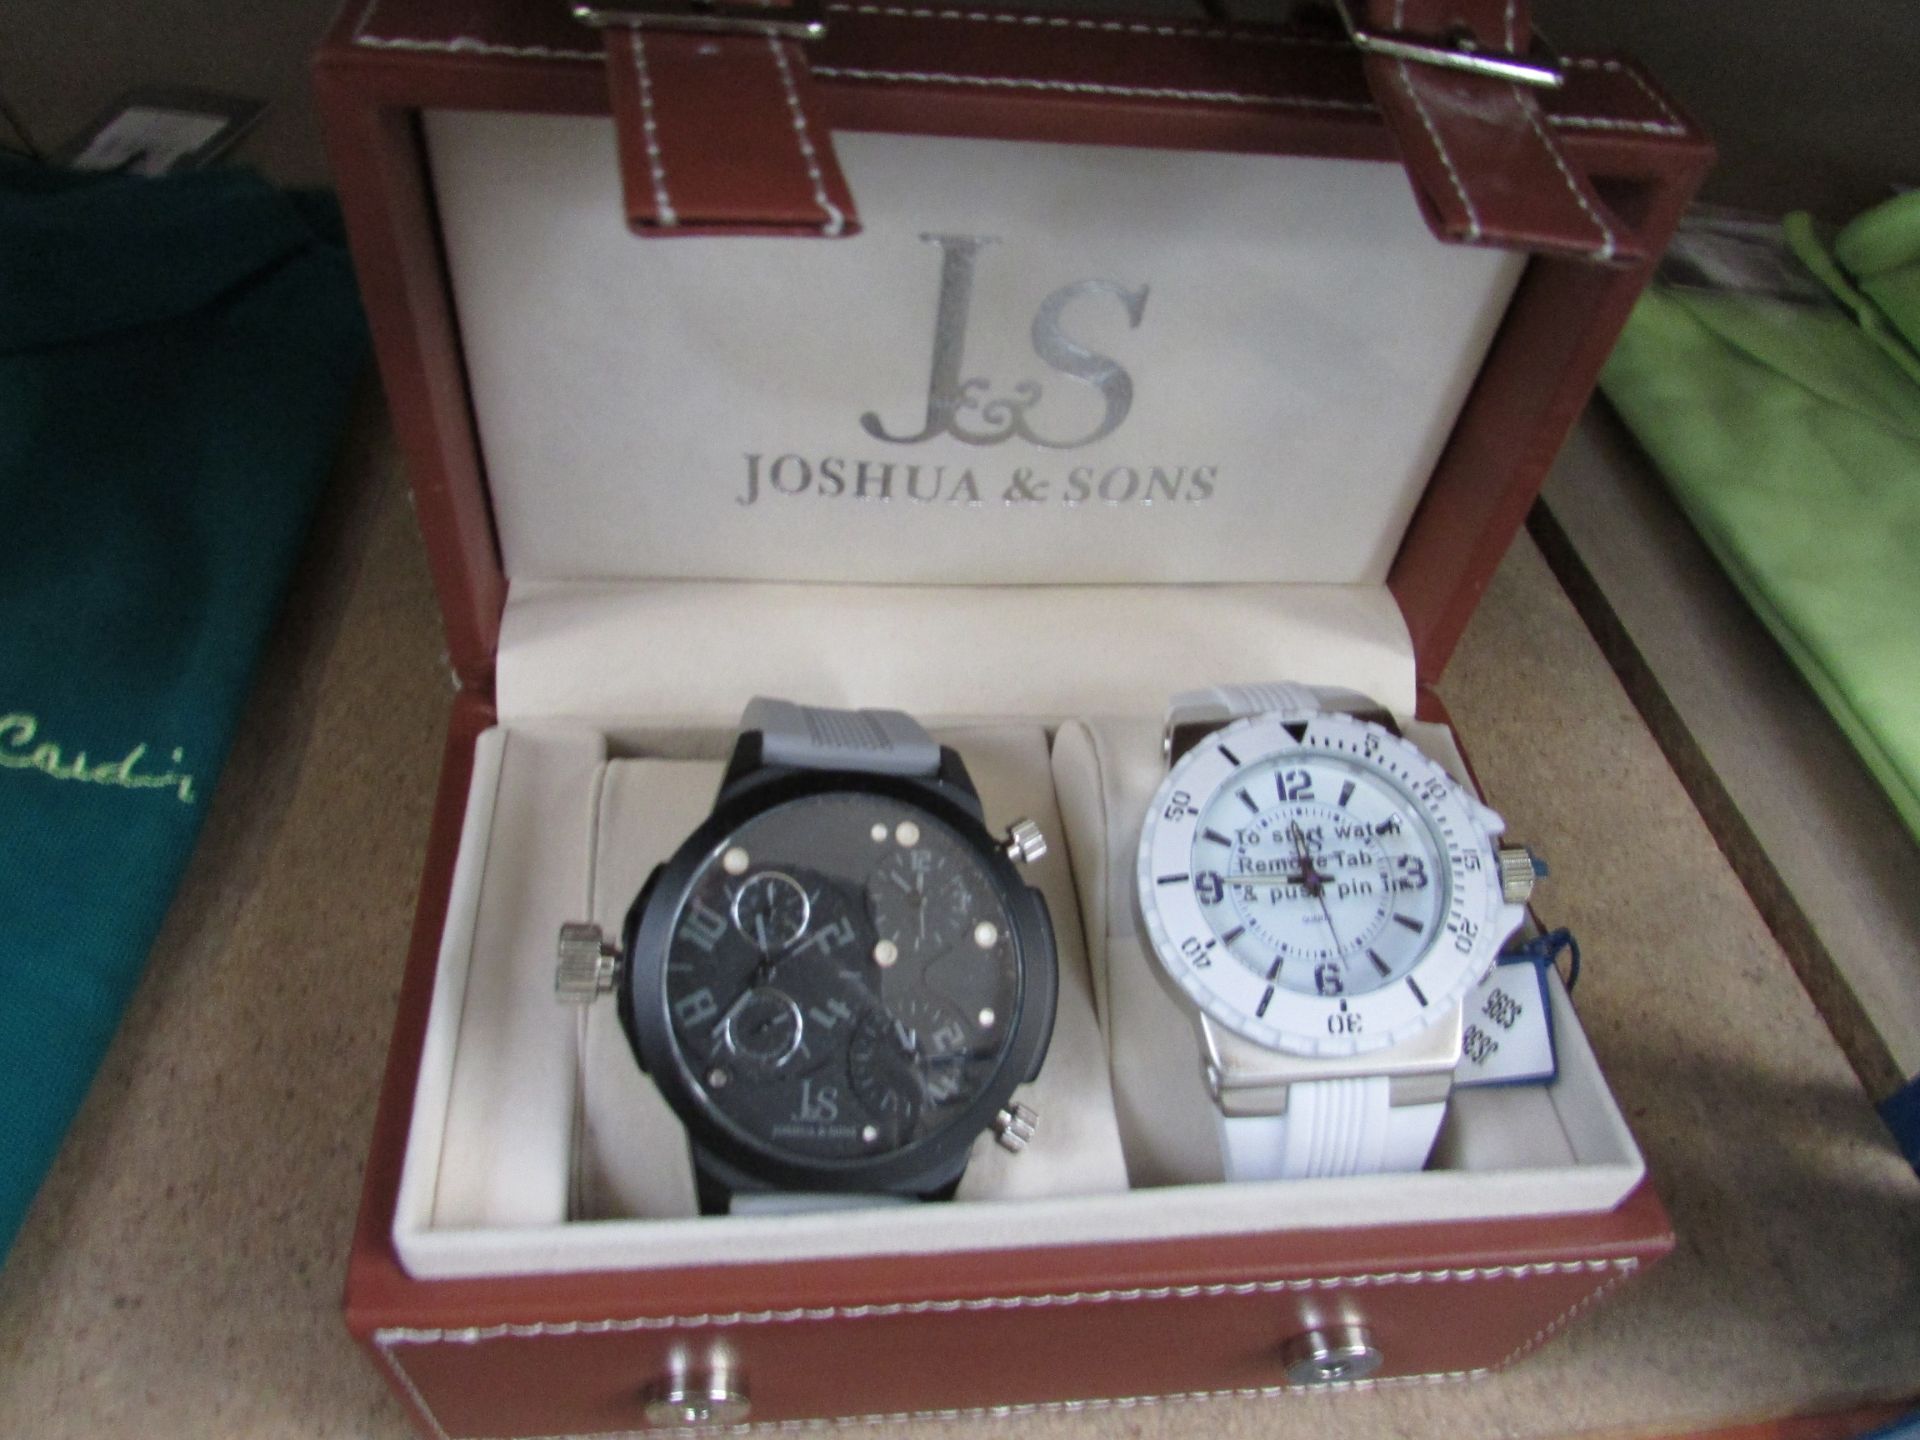 2X JOSHUA & SONS MENS WATCHES LARGE FACES MODEL NUMBER JS38WT/JS-40-GY